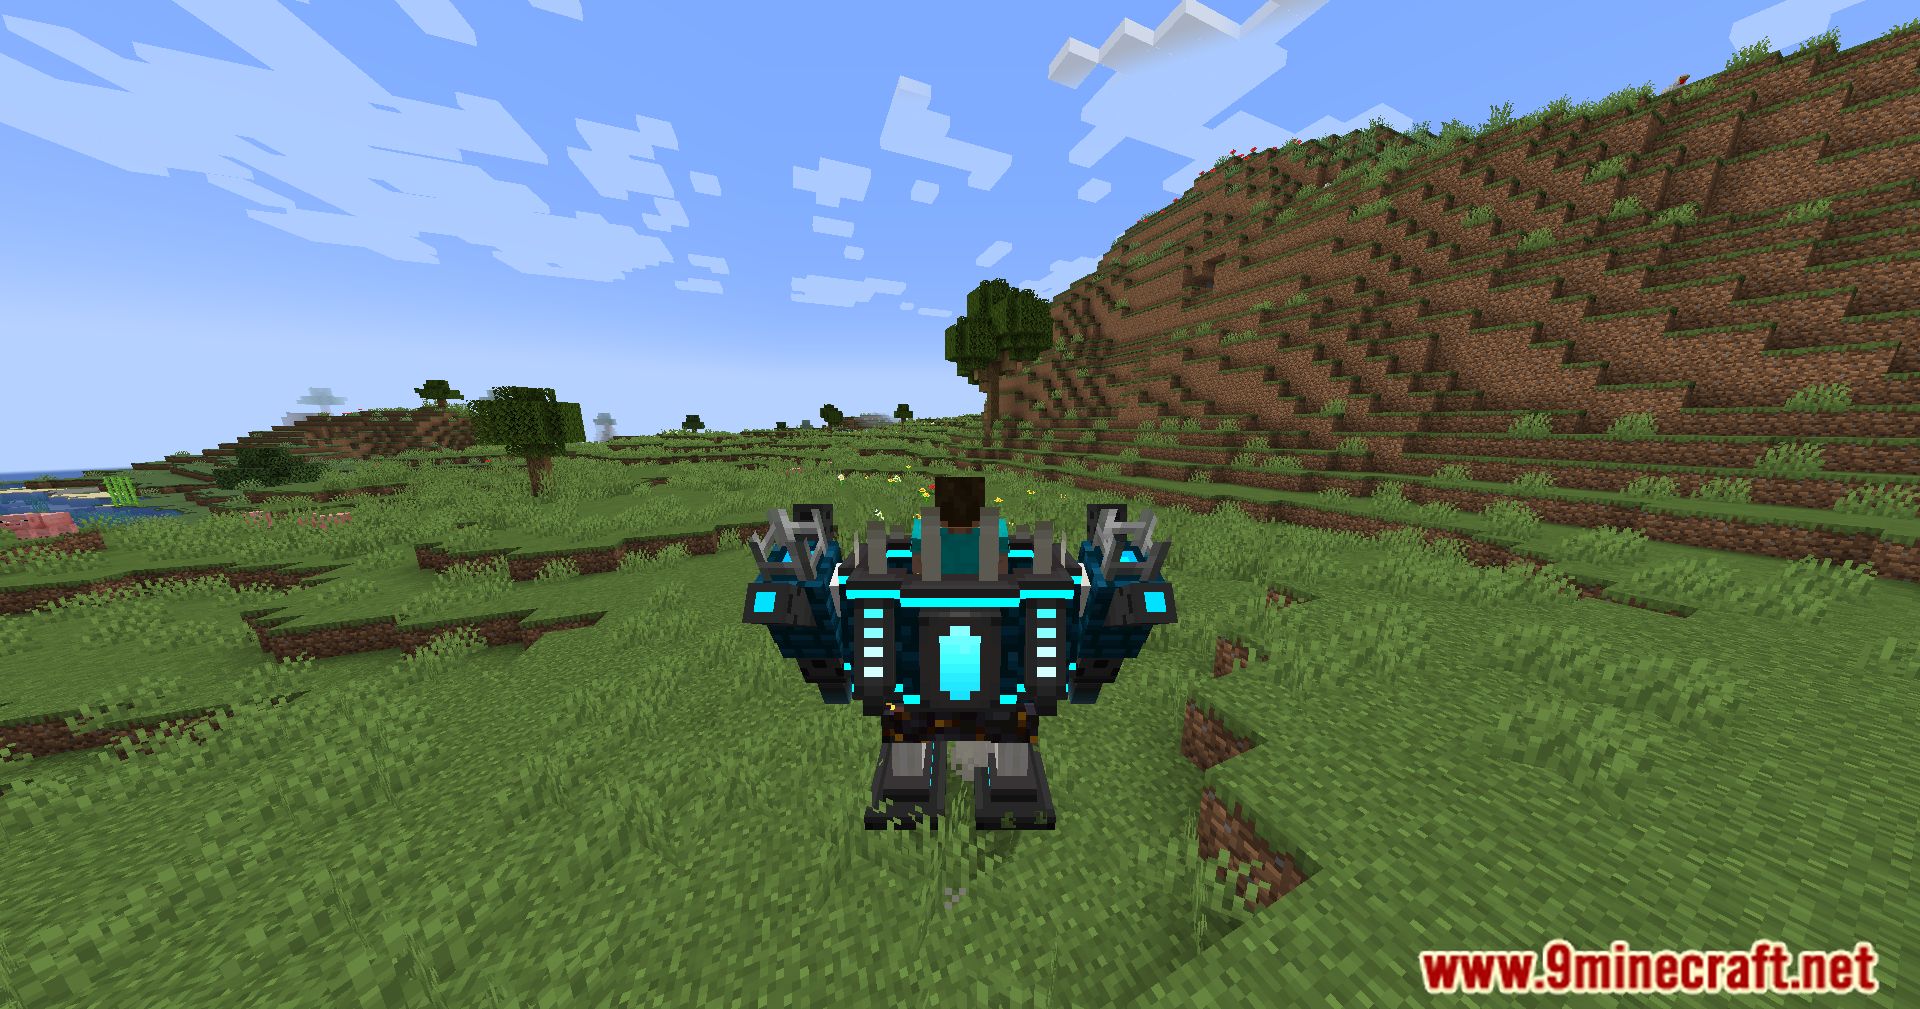 Armored Redstone Mod (1.20.1, 1.19.3) - Forge Your Path With Redstone-Powered Adventures! 17